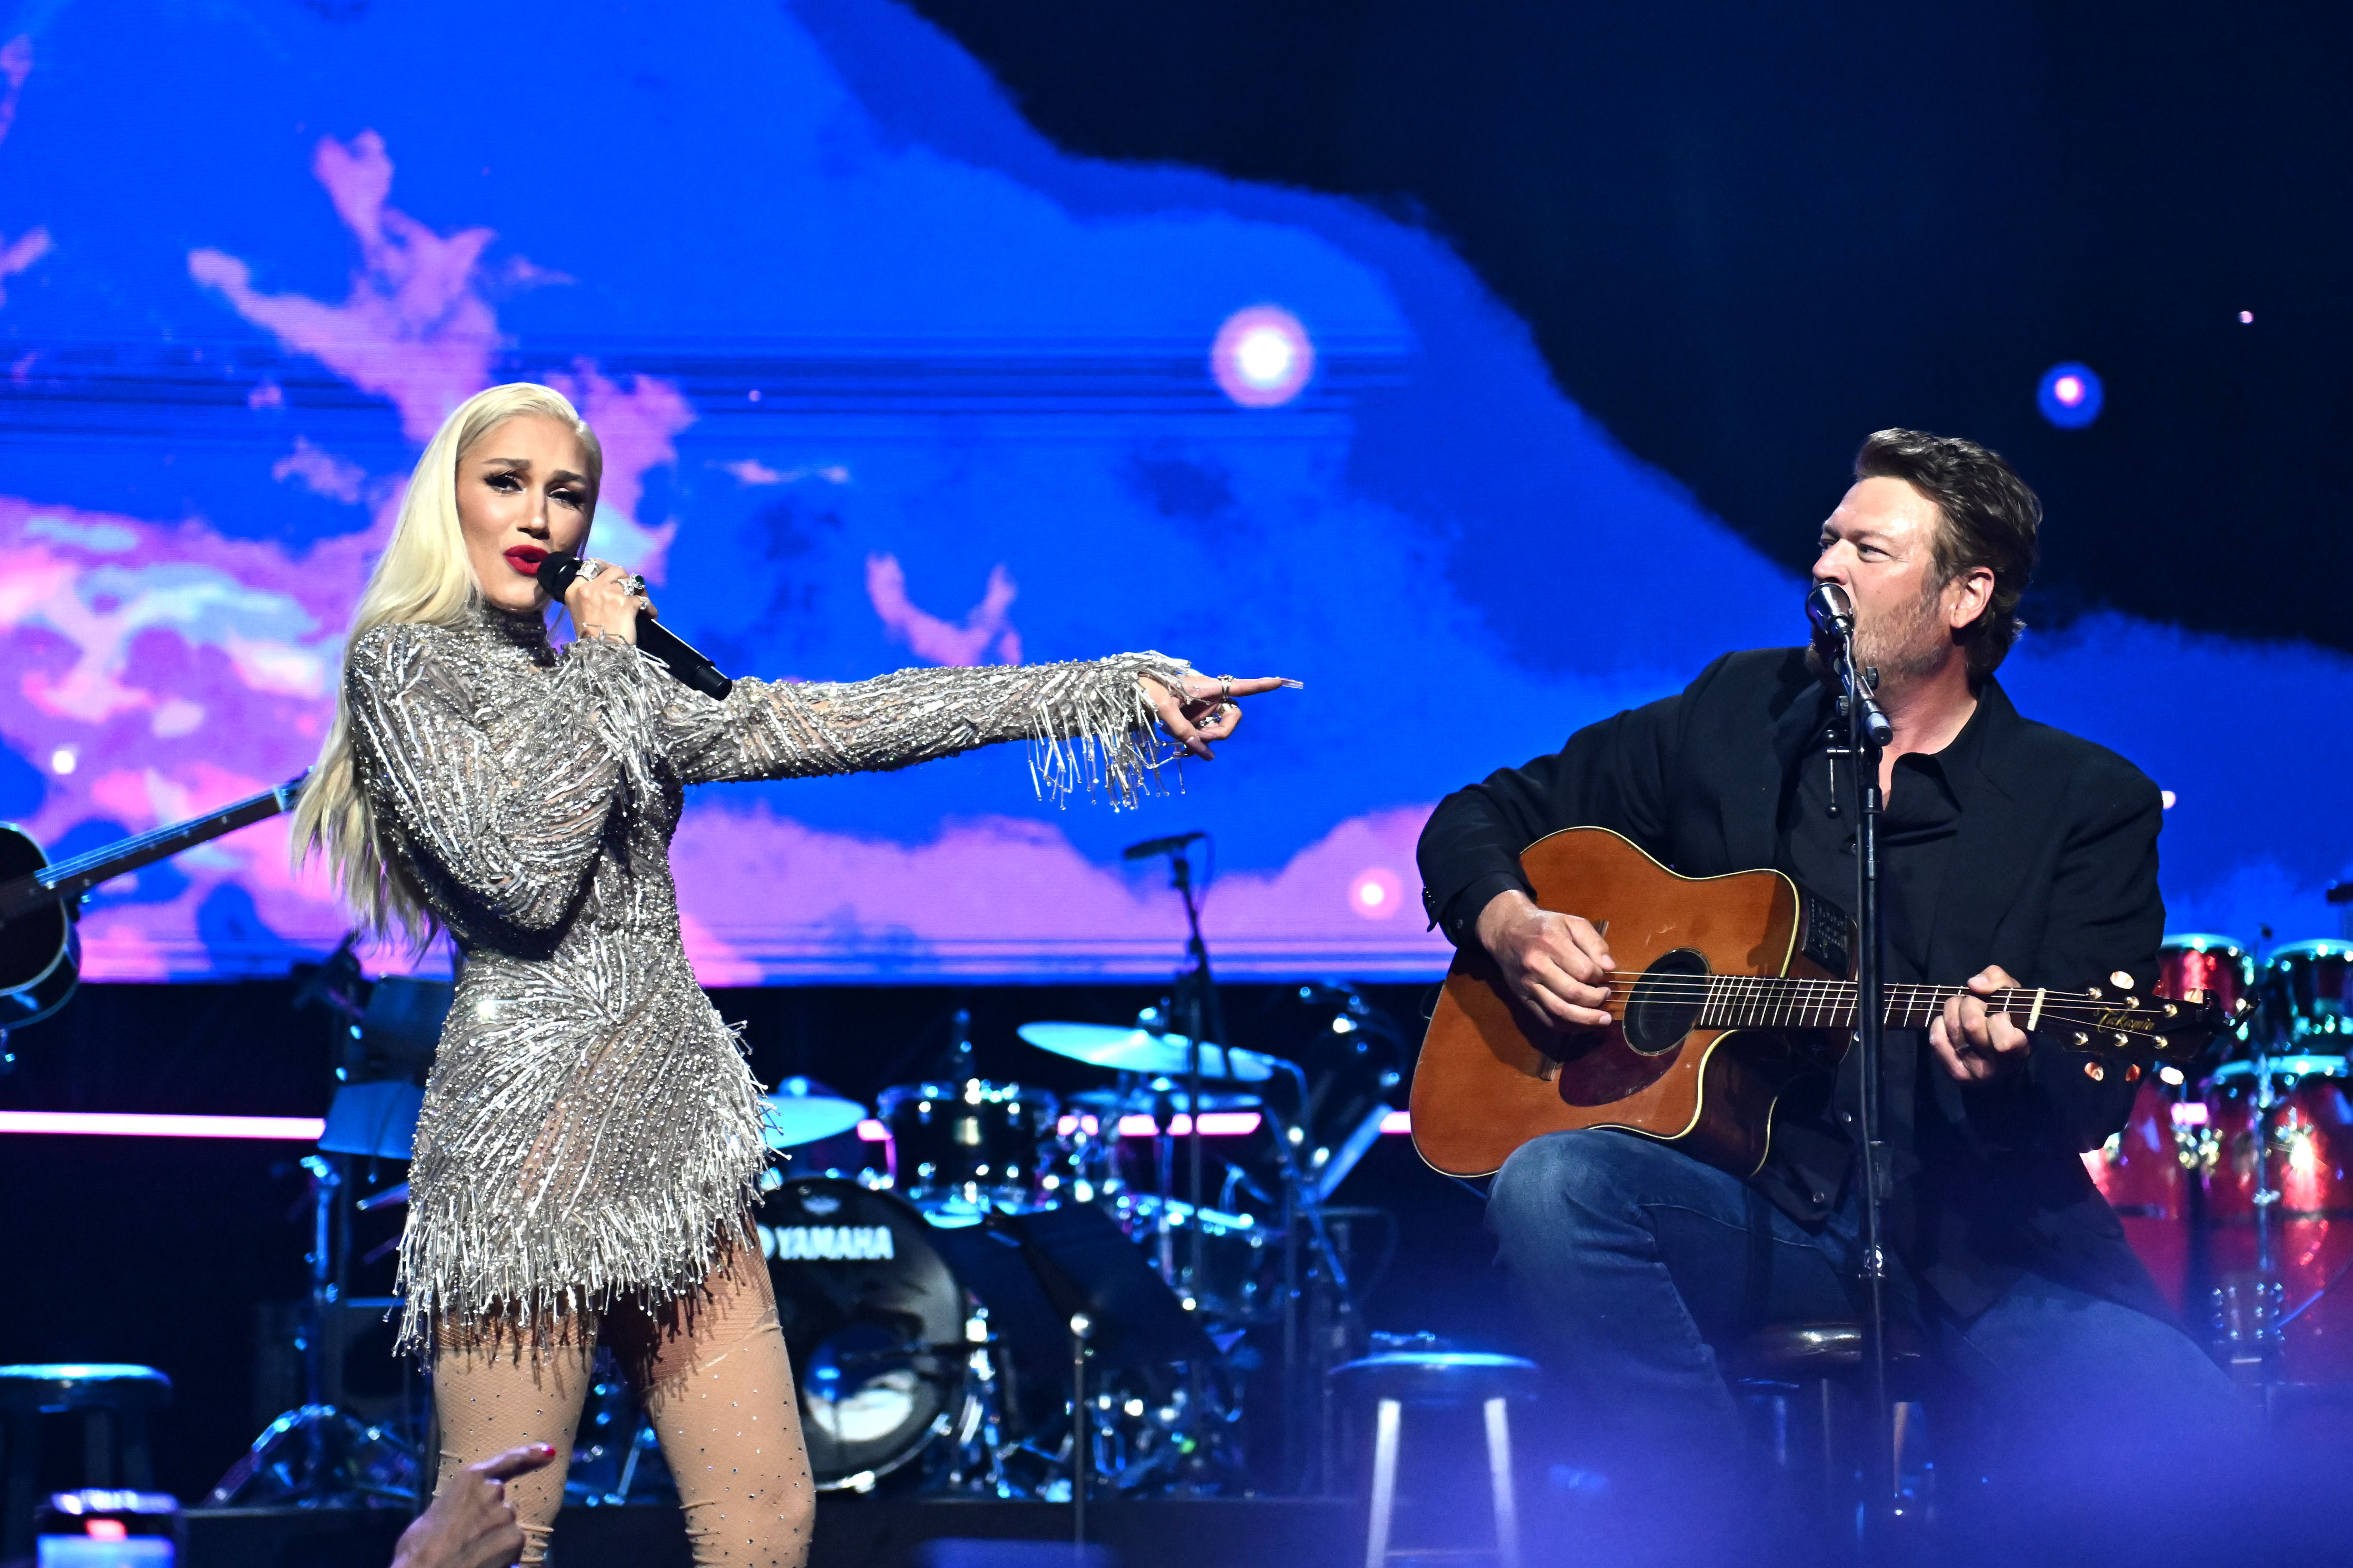 The singer joked that because Gwen was in town, he would make sure she performed in front of the crowd at MGM Garden Arena